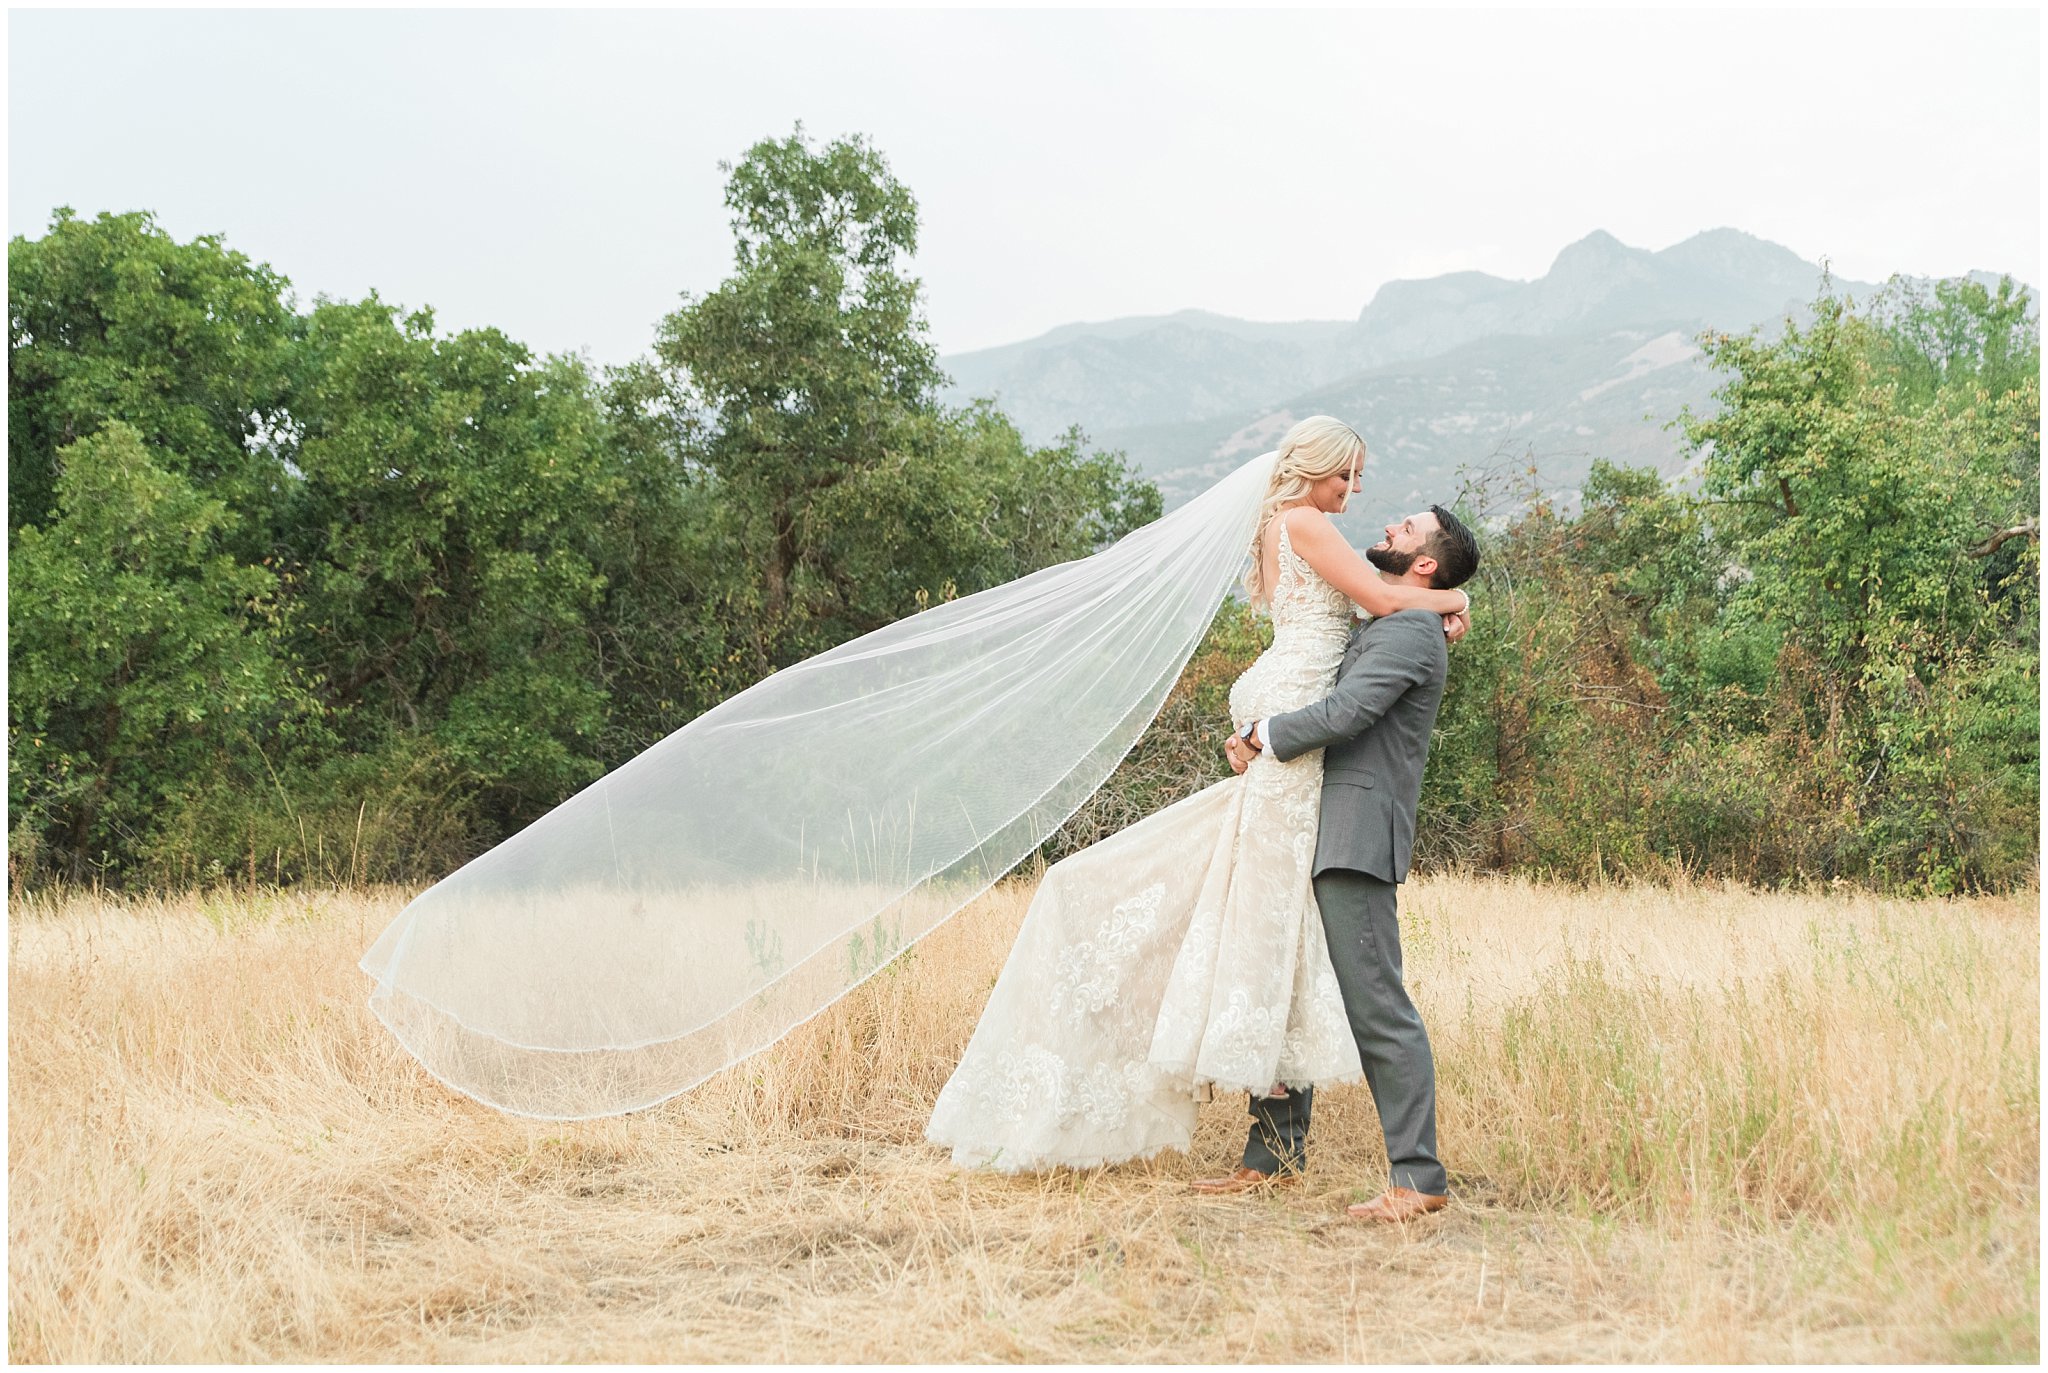 Bride and groom portraits with lace dress and cathedral veil and gray suit with blue floral tie | Dusty Blue and Rose Summer Wedding at Oak Hills Utah | Jessie and Dallin Photography